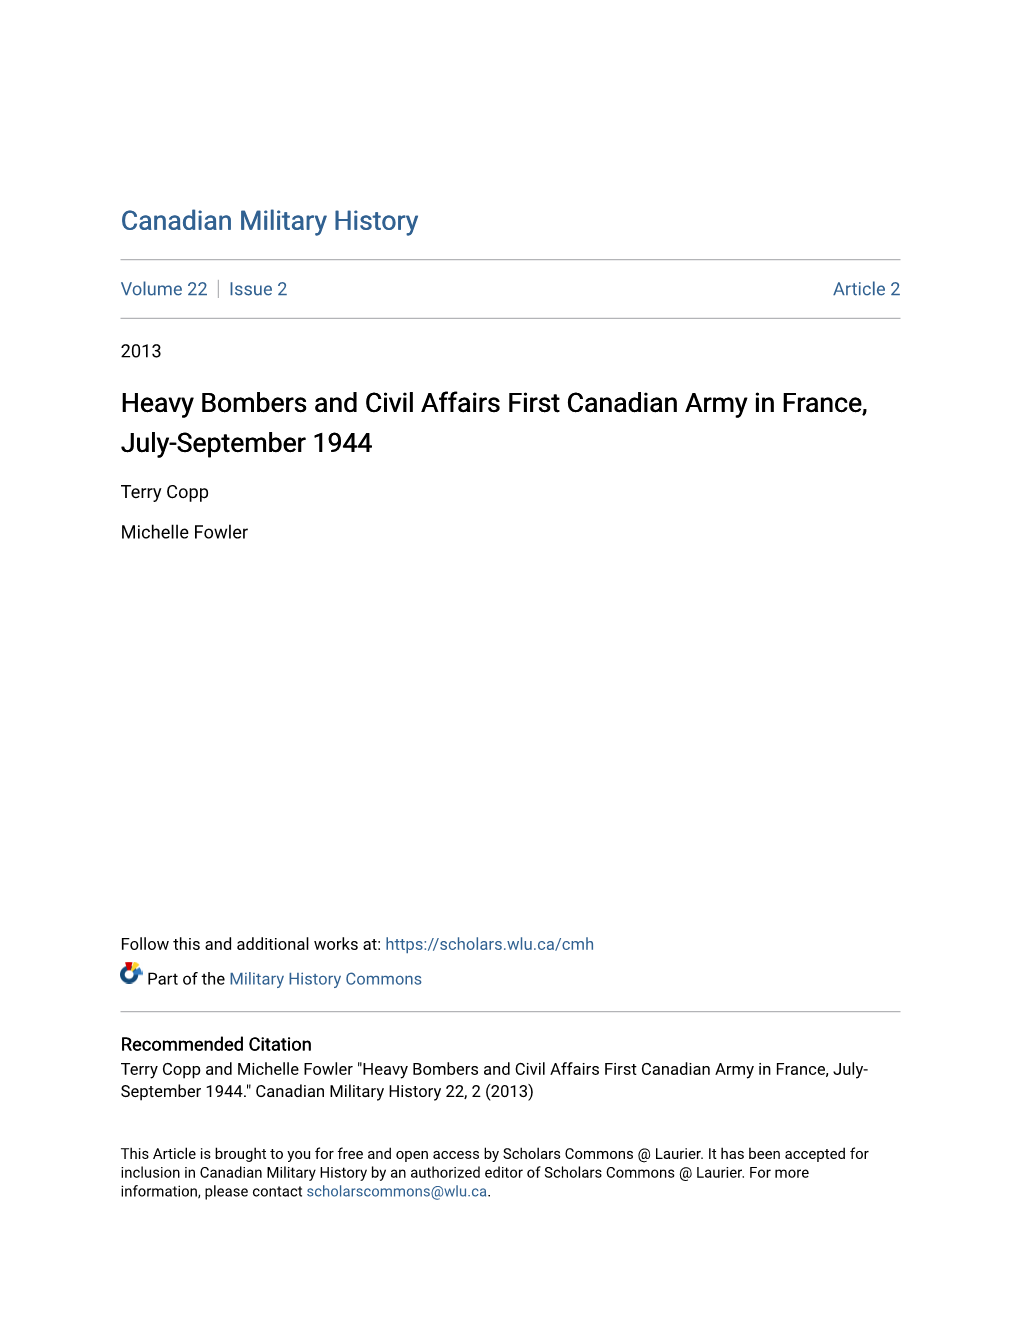 Heavy Bombers and Civil Affairs First Canadian Army in France, July-September 1944